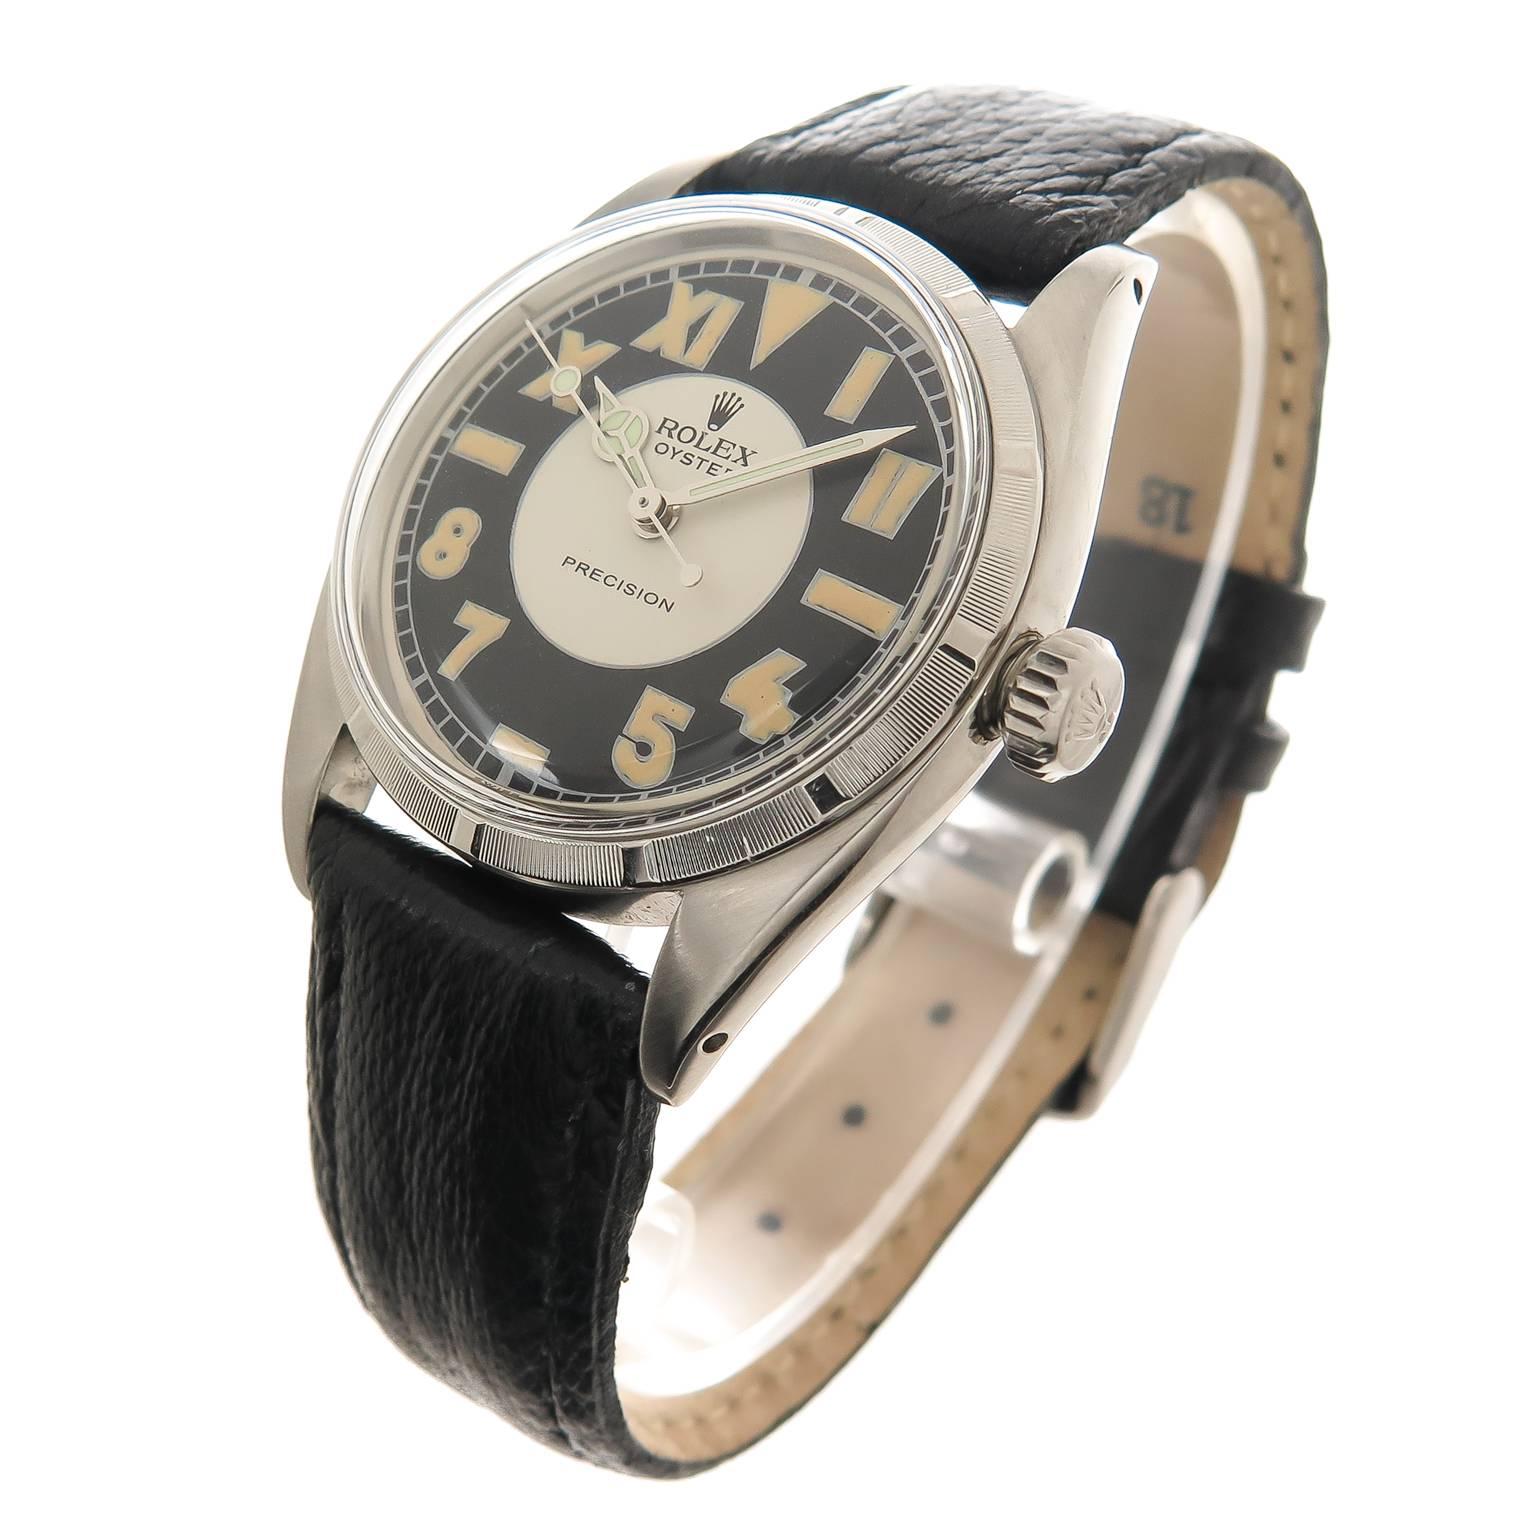 Circa 1957 Rolex Reference 6423 Oyster Precision  watch, 34 MM stainless steel Waterproof oyster Case with Engine Turned Bezel. 17 Jewel Caliber 1210 Manual Winding Movement, Restored California style Dial with sweep and Mercedes hands. Original